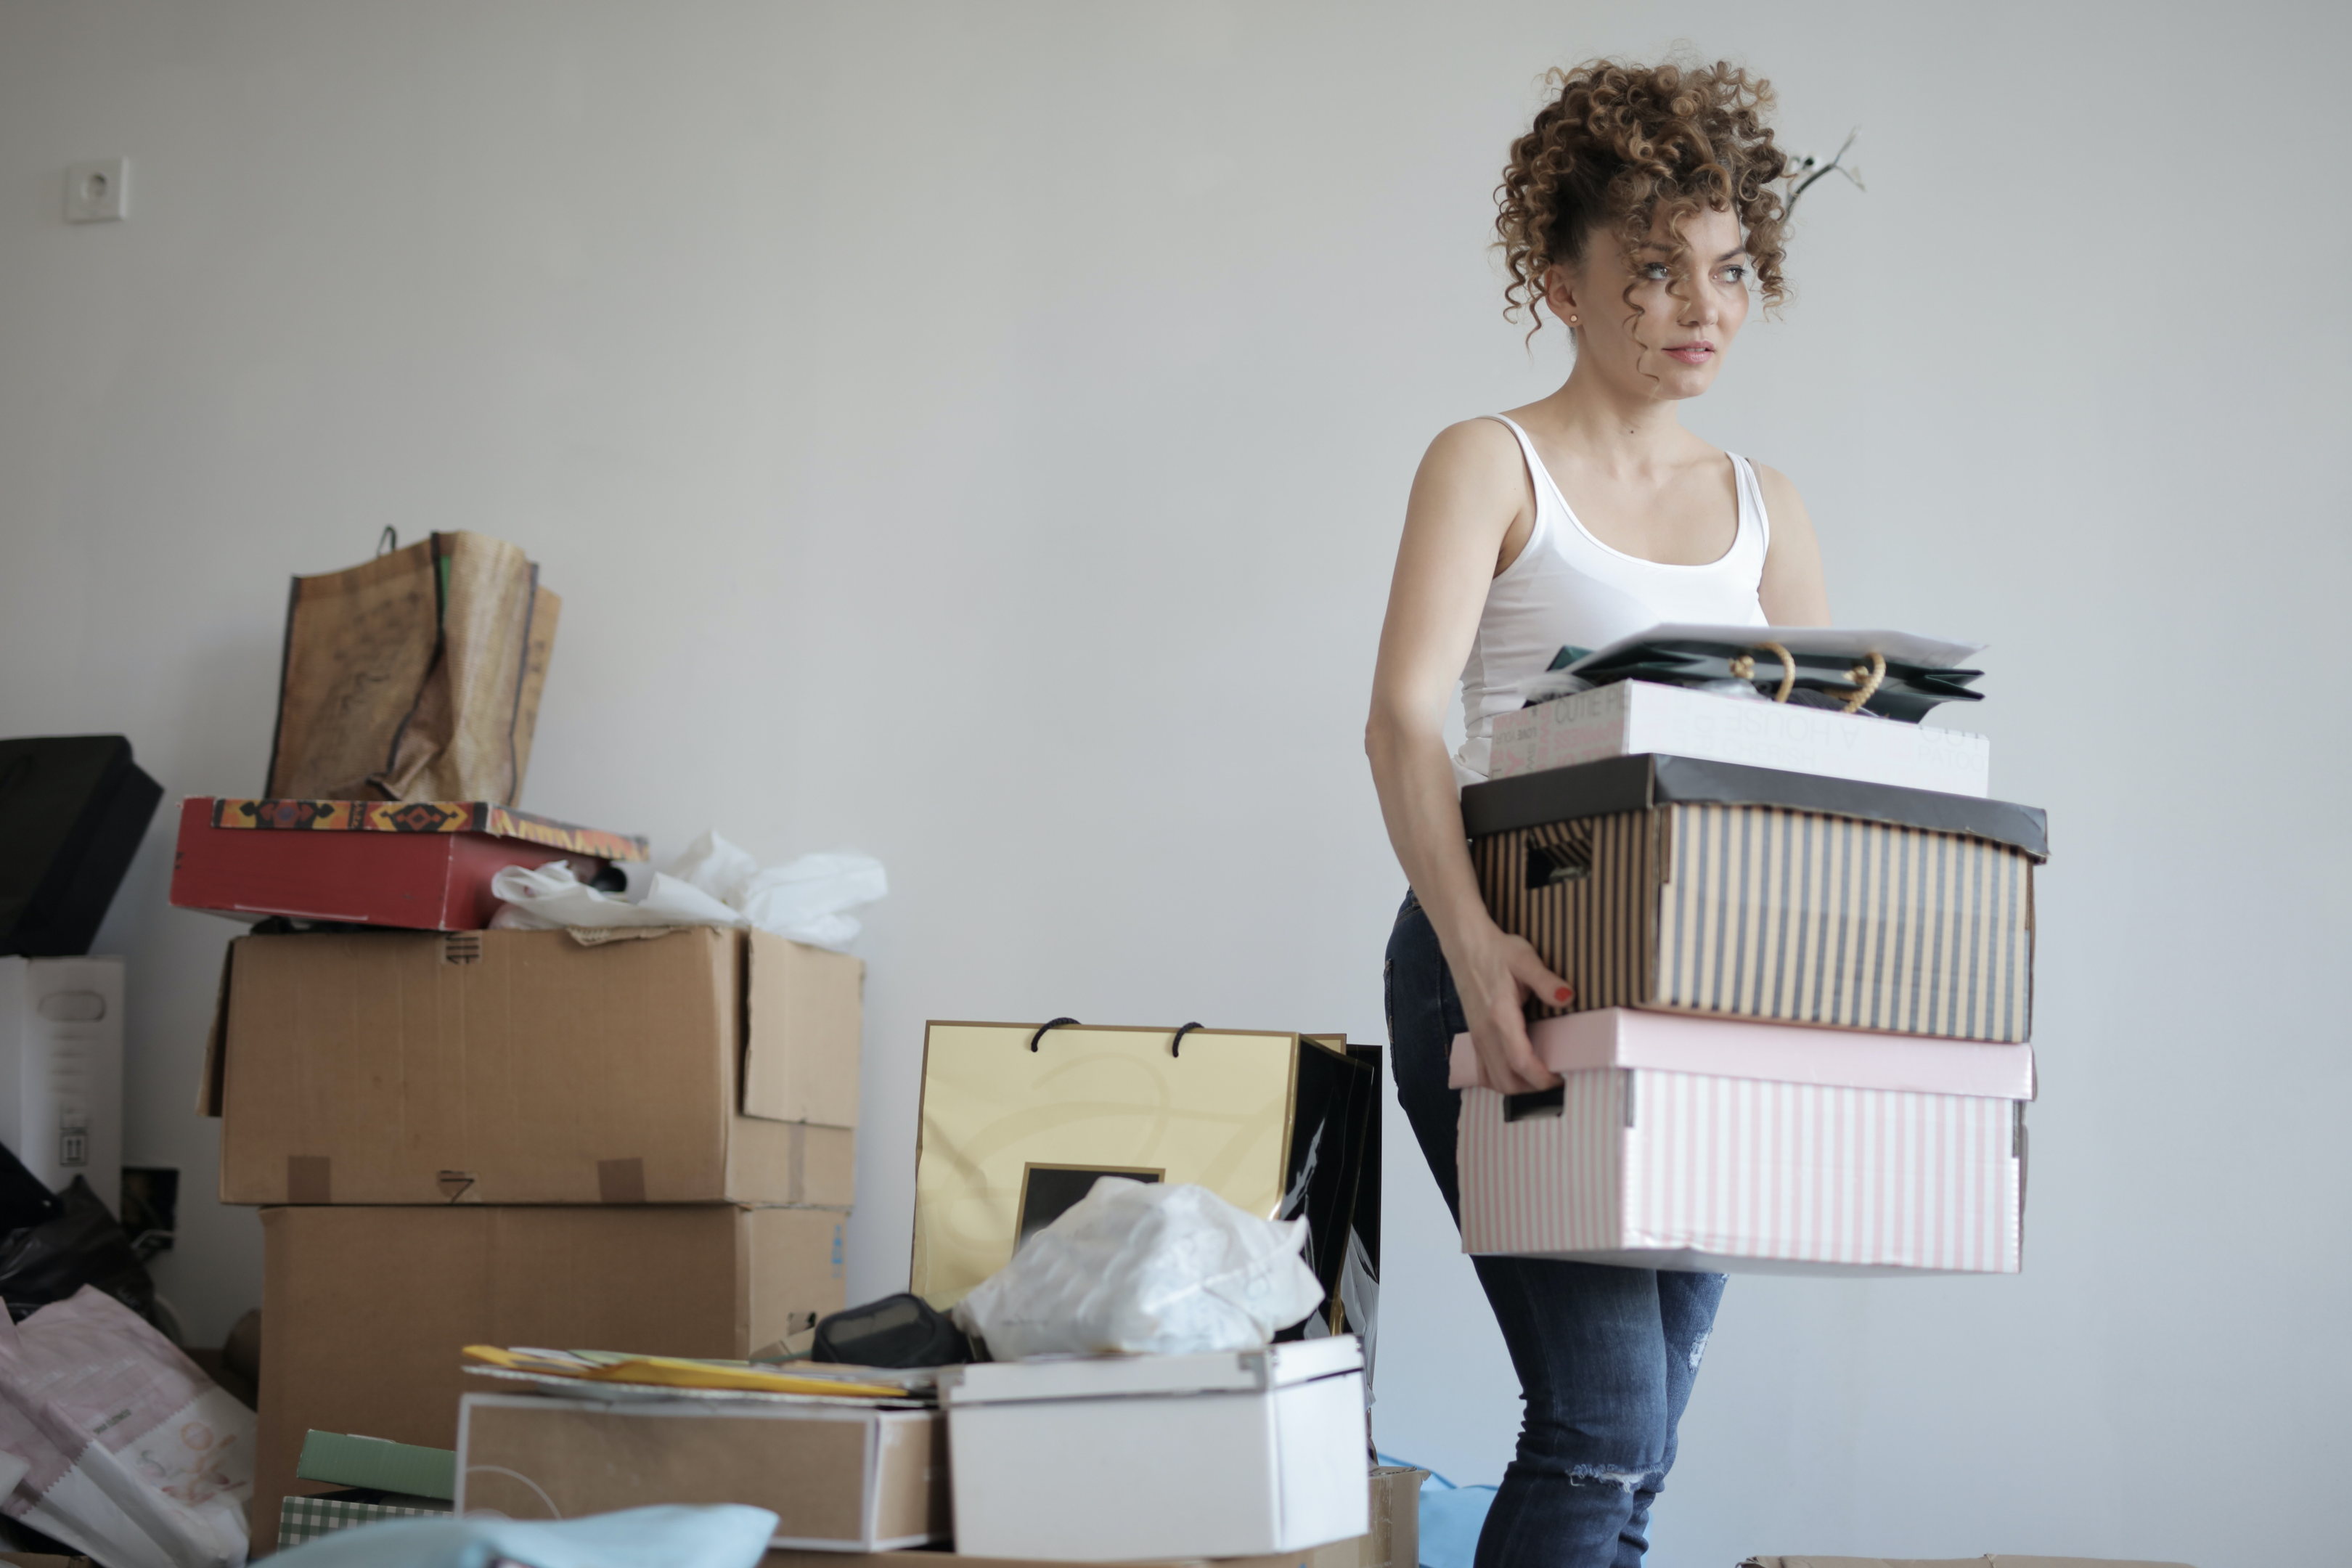 Photo by Andrea Piacquadio: https://www.pexels.com/photo/concentrated-woman-carrying-stack-of-cardboard-boxes-for-relocation-3791617/